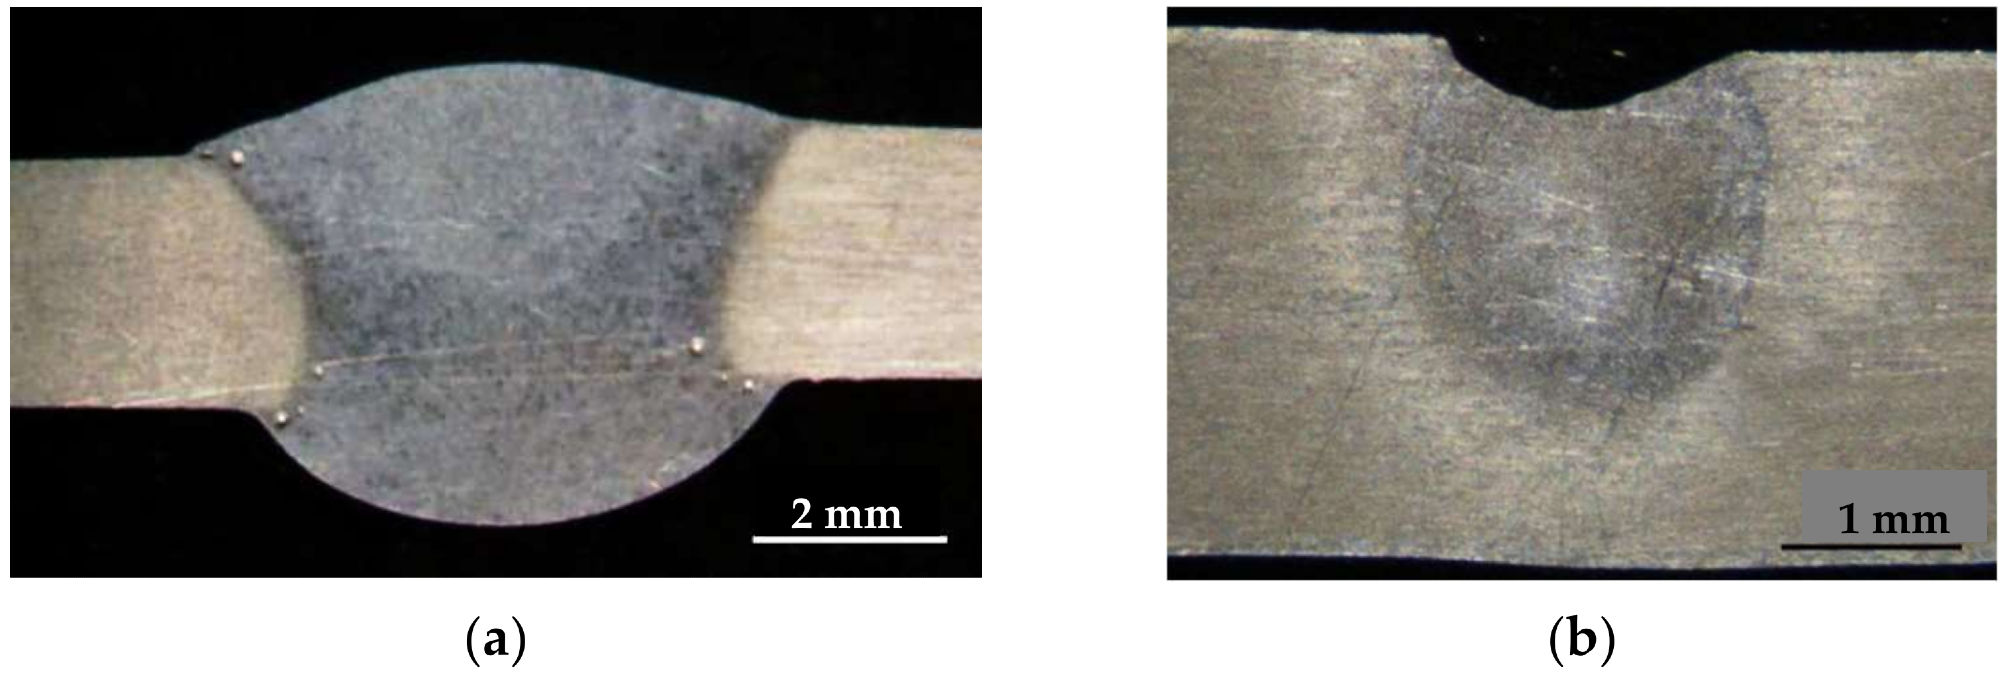 Macrostructure of welds made by different welding methods of 1420 alloy at different initial state: (a) argon arc welding (MIG) with AlMg-6 wire, base material after TVT; (b) electron beam welding (EBW), base material after TVT.